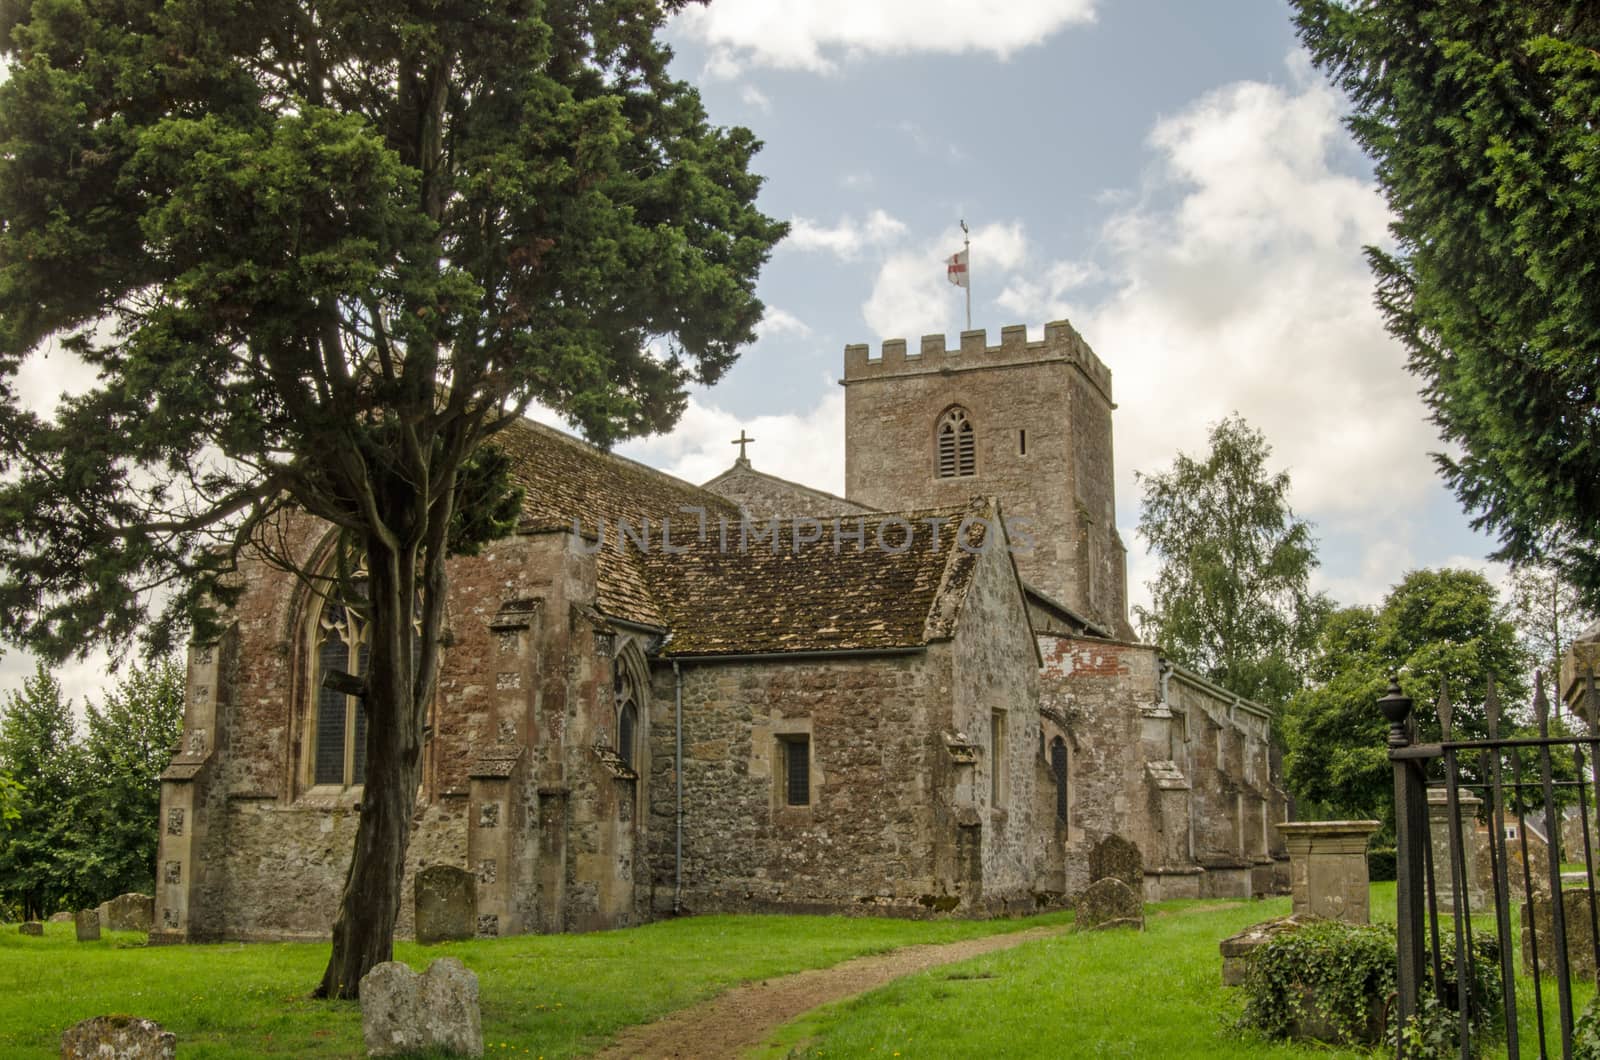 The historic church of St Mary in the village of Market Lavington, Wiltshire, England.  